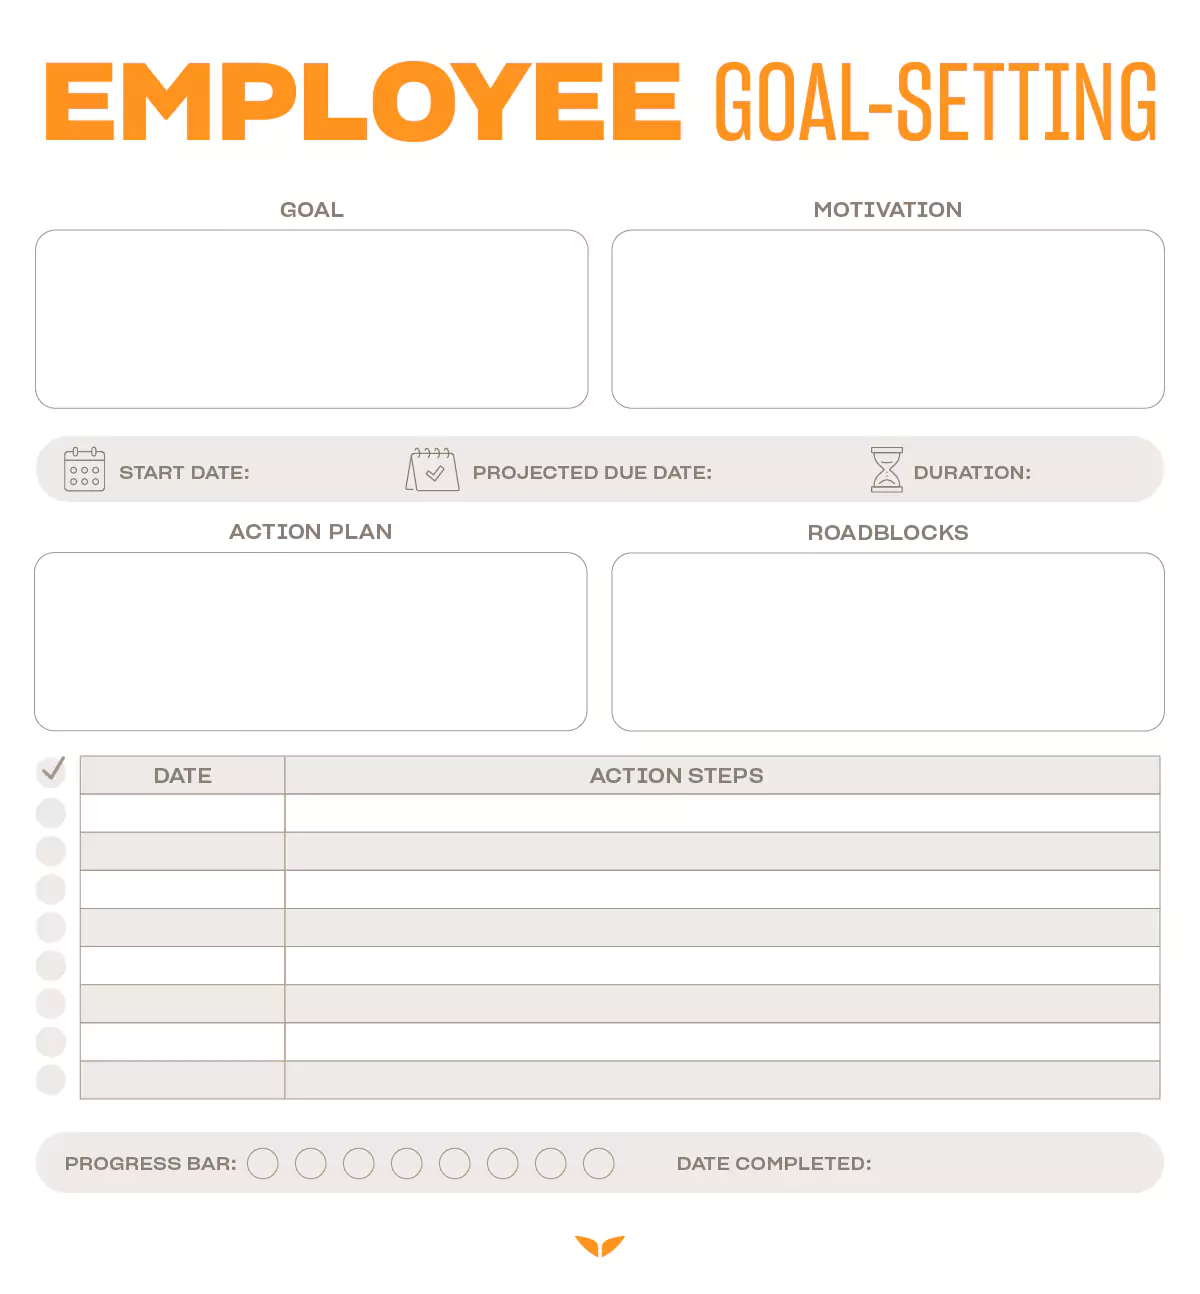 Lifebook Online Review - Employee Goal-Setting Template